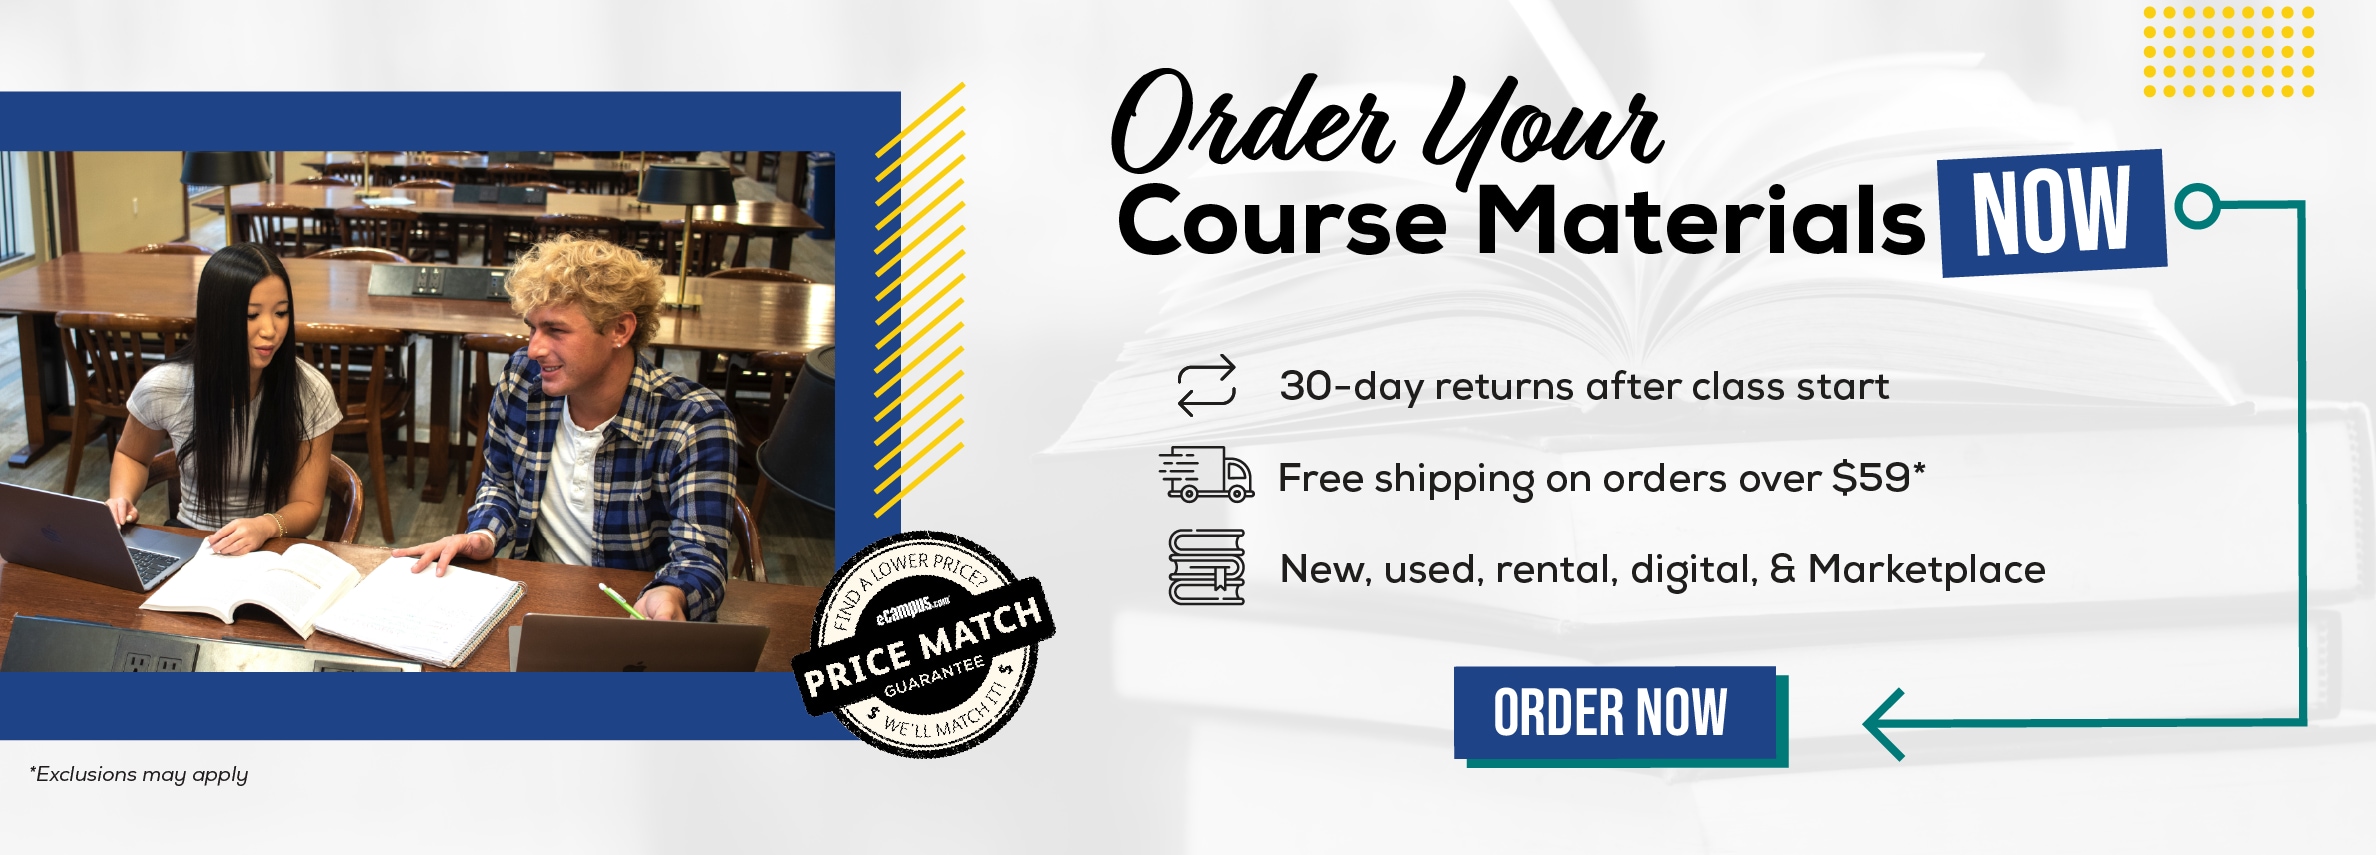 Order Your Course Materials Now. 30-day returns after class start. Free shipping on orders over $59* New, used, rental, digital, & Marketplace. Order now. *Exclusions may apply.